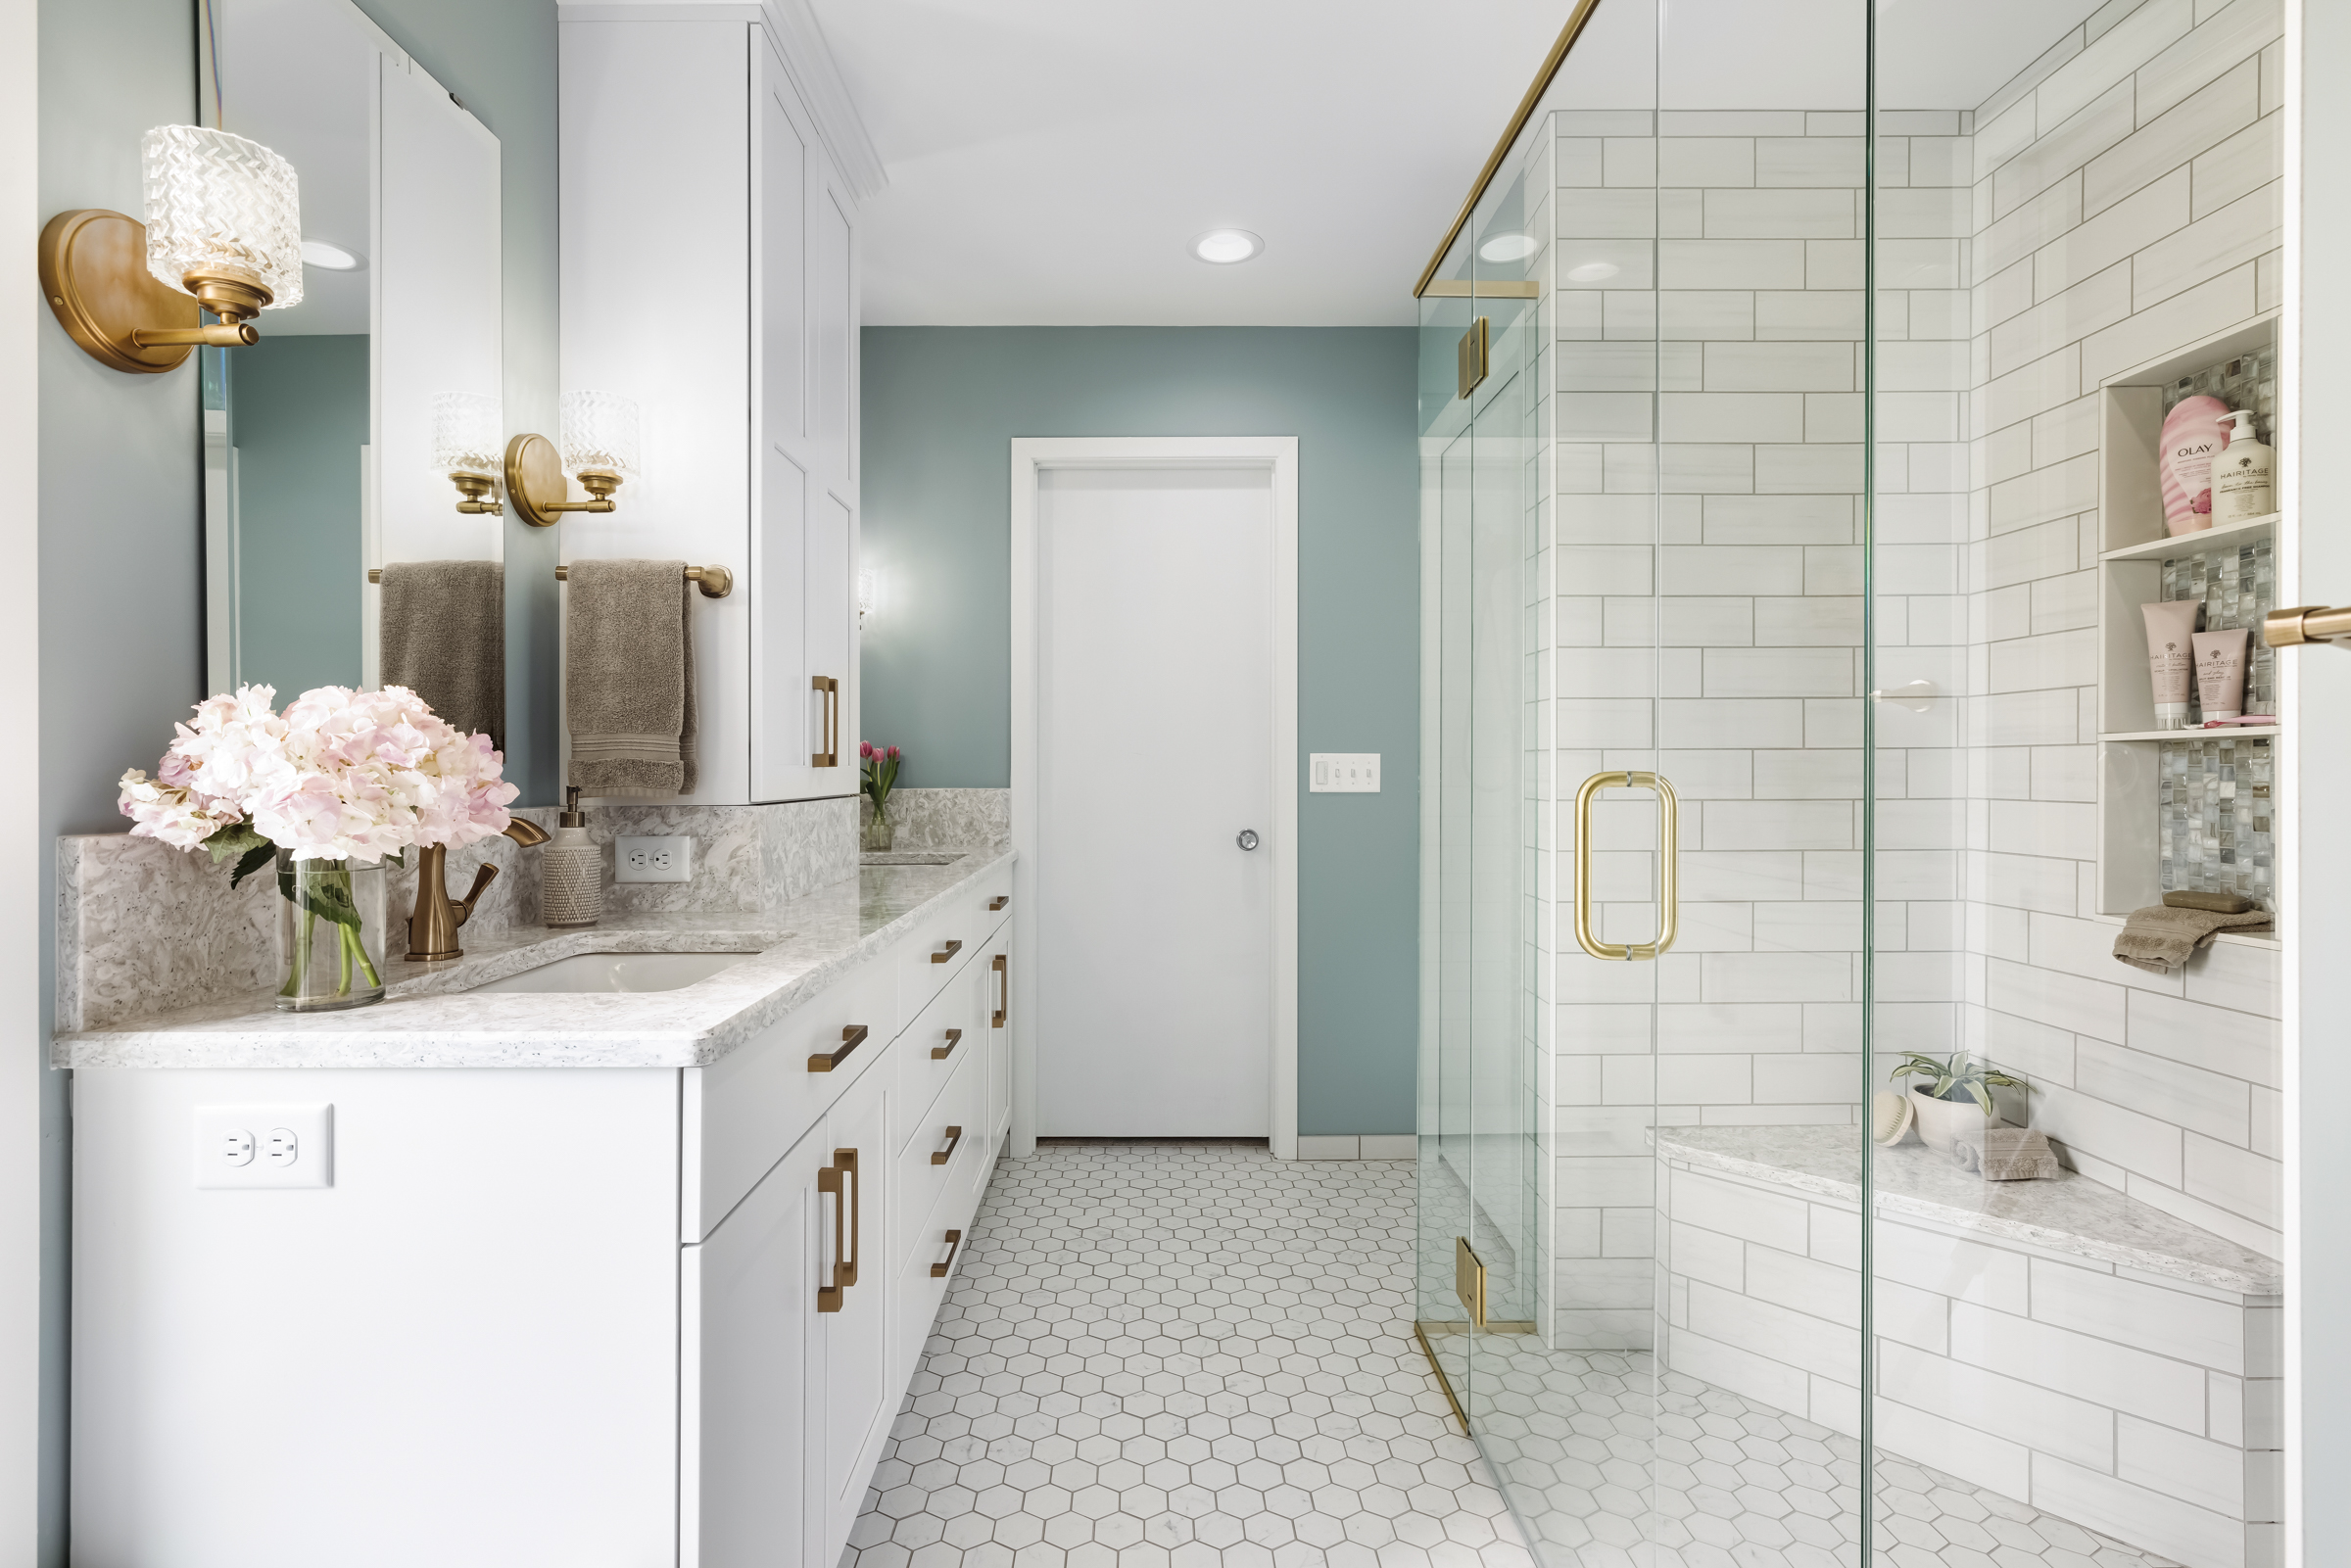 Bright primary bathroom remodel with blue accent wall, large walk-in shower, and gold metal